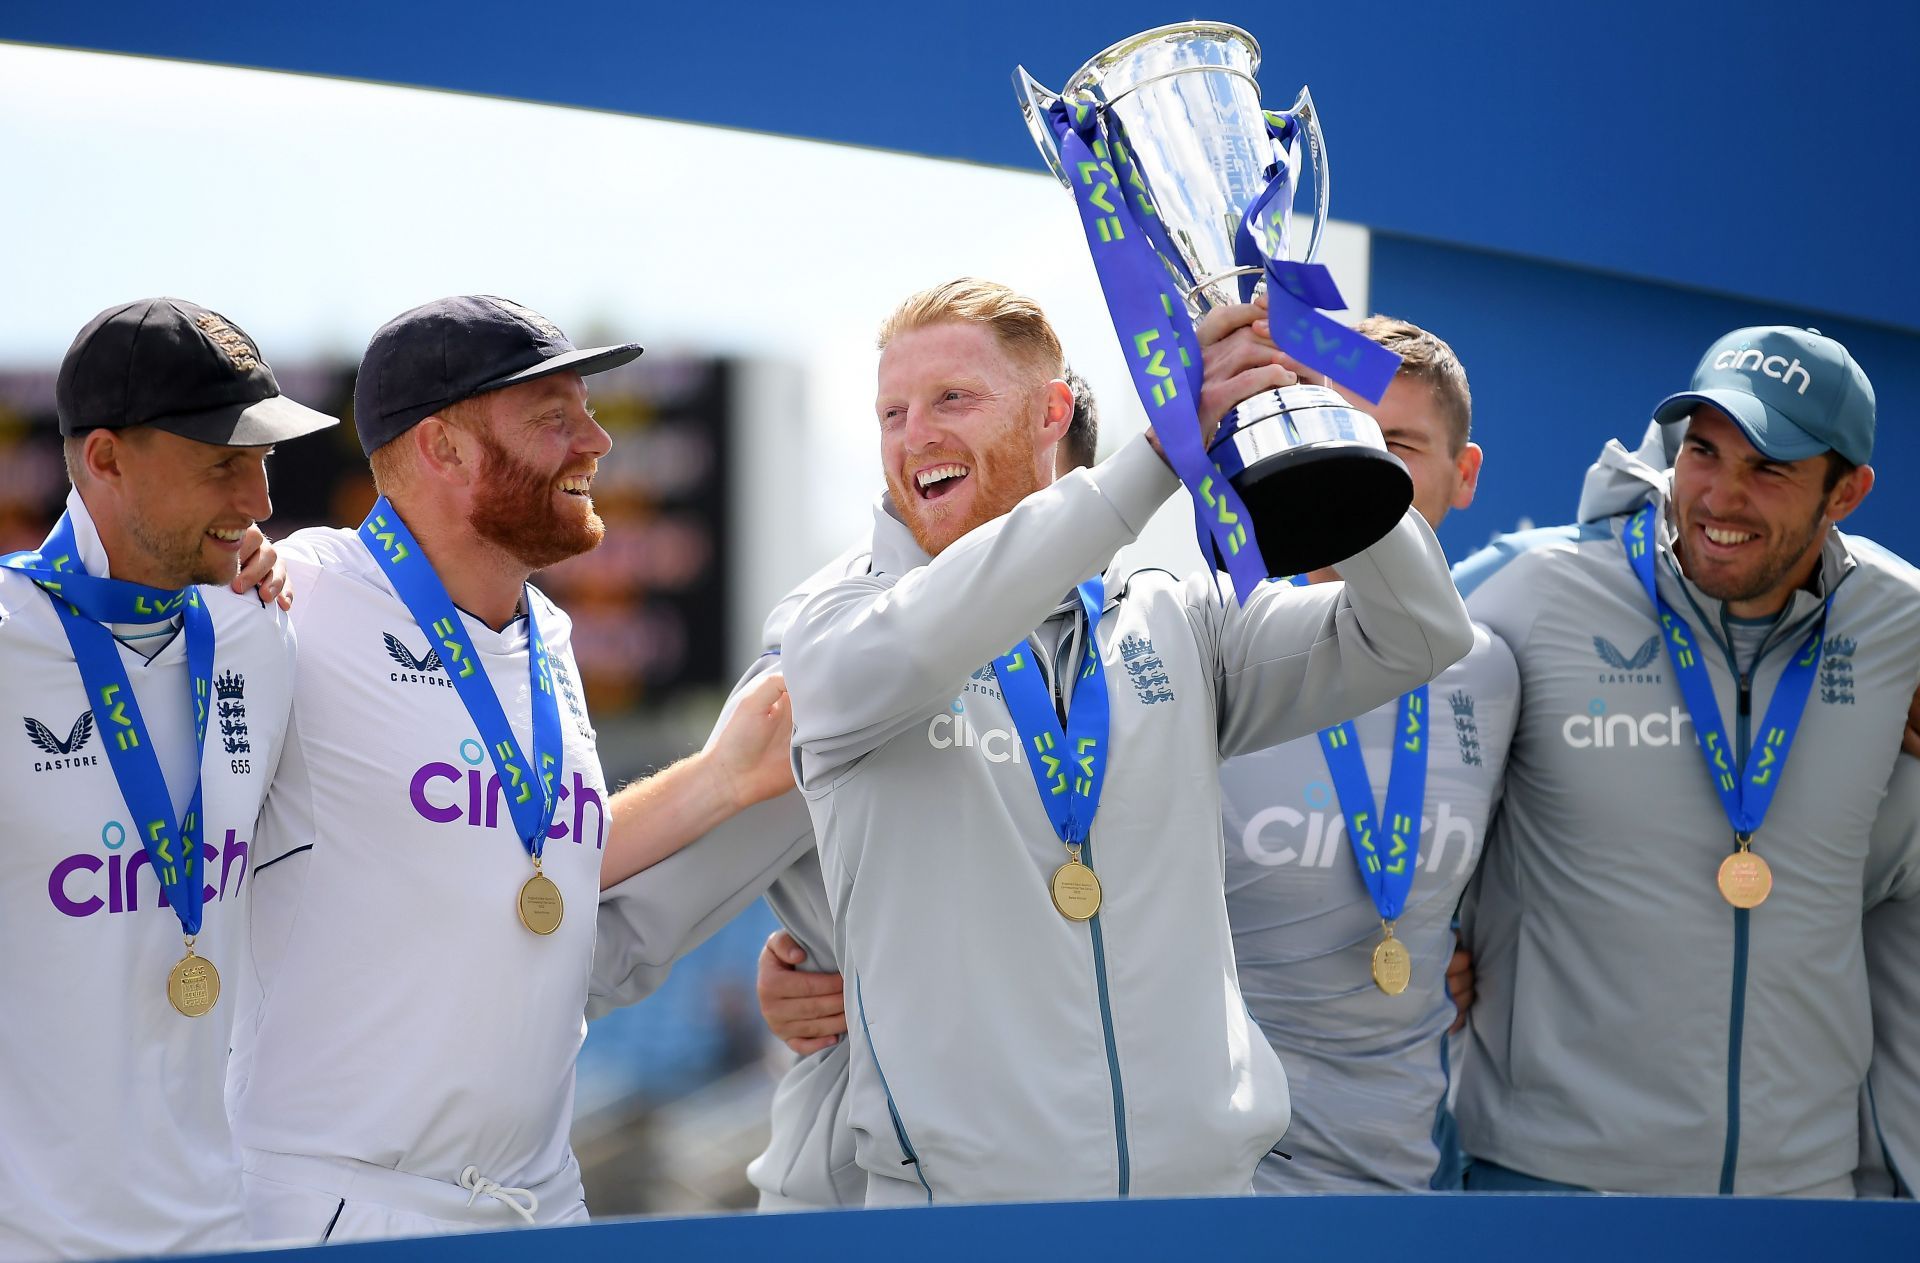 England handed New Zealand a whitewash in the three-match Test series.